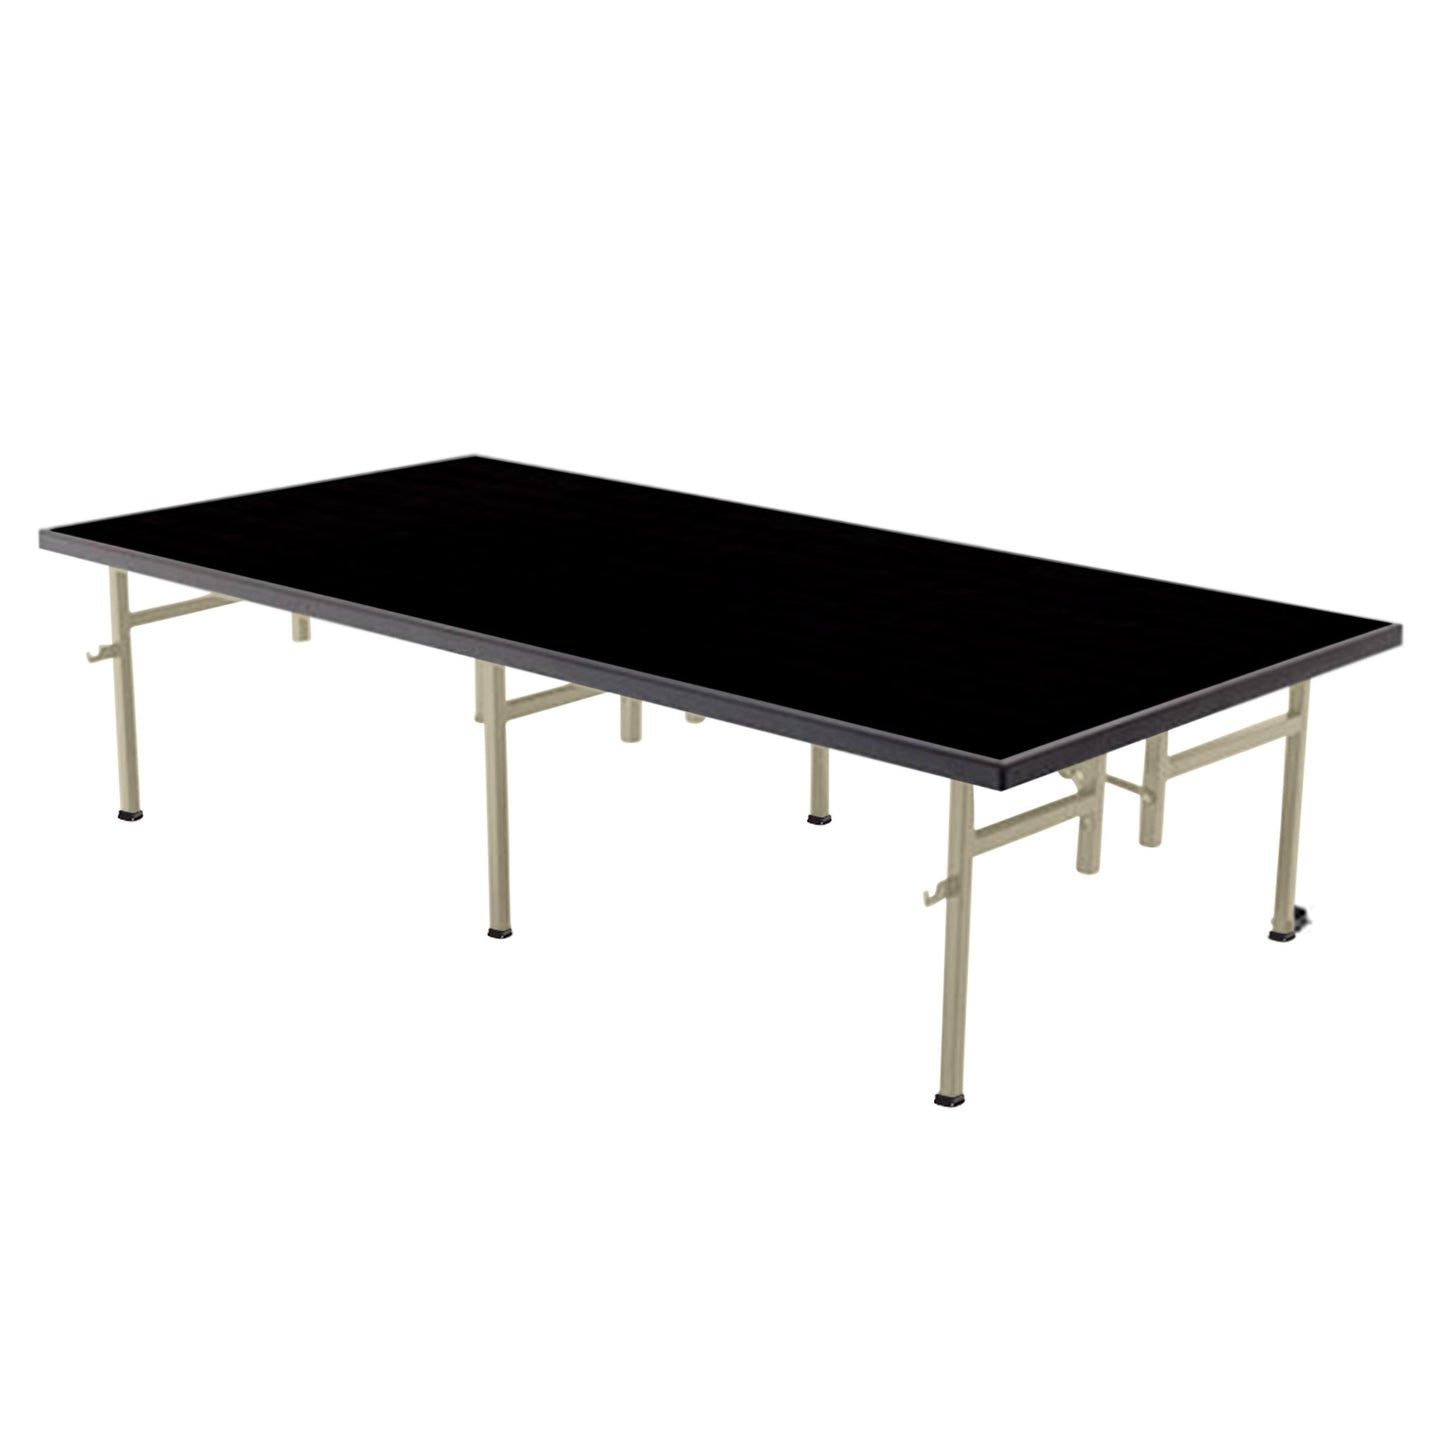 AmTab Fixed Height Stage - Polypropylene Top - 36"W x 72"L x 16"H  (AmTab AMT-ST3616P)